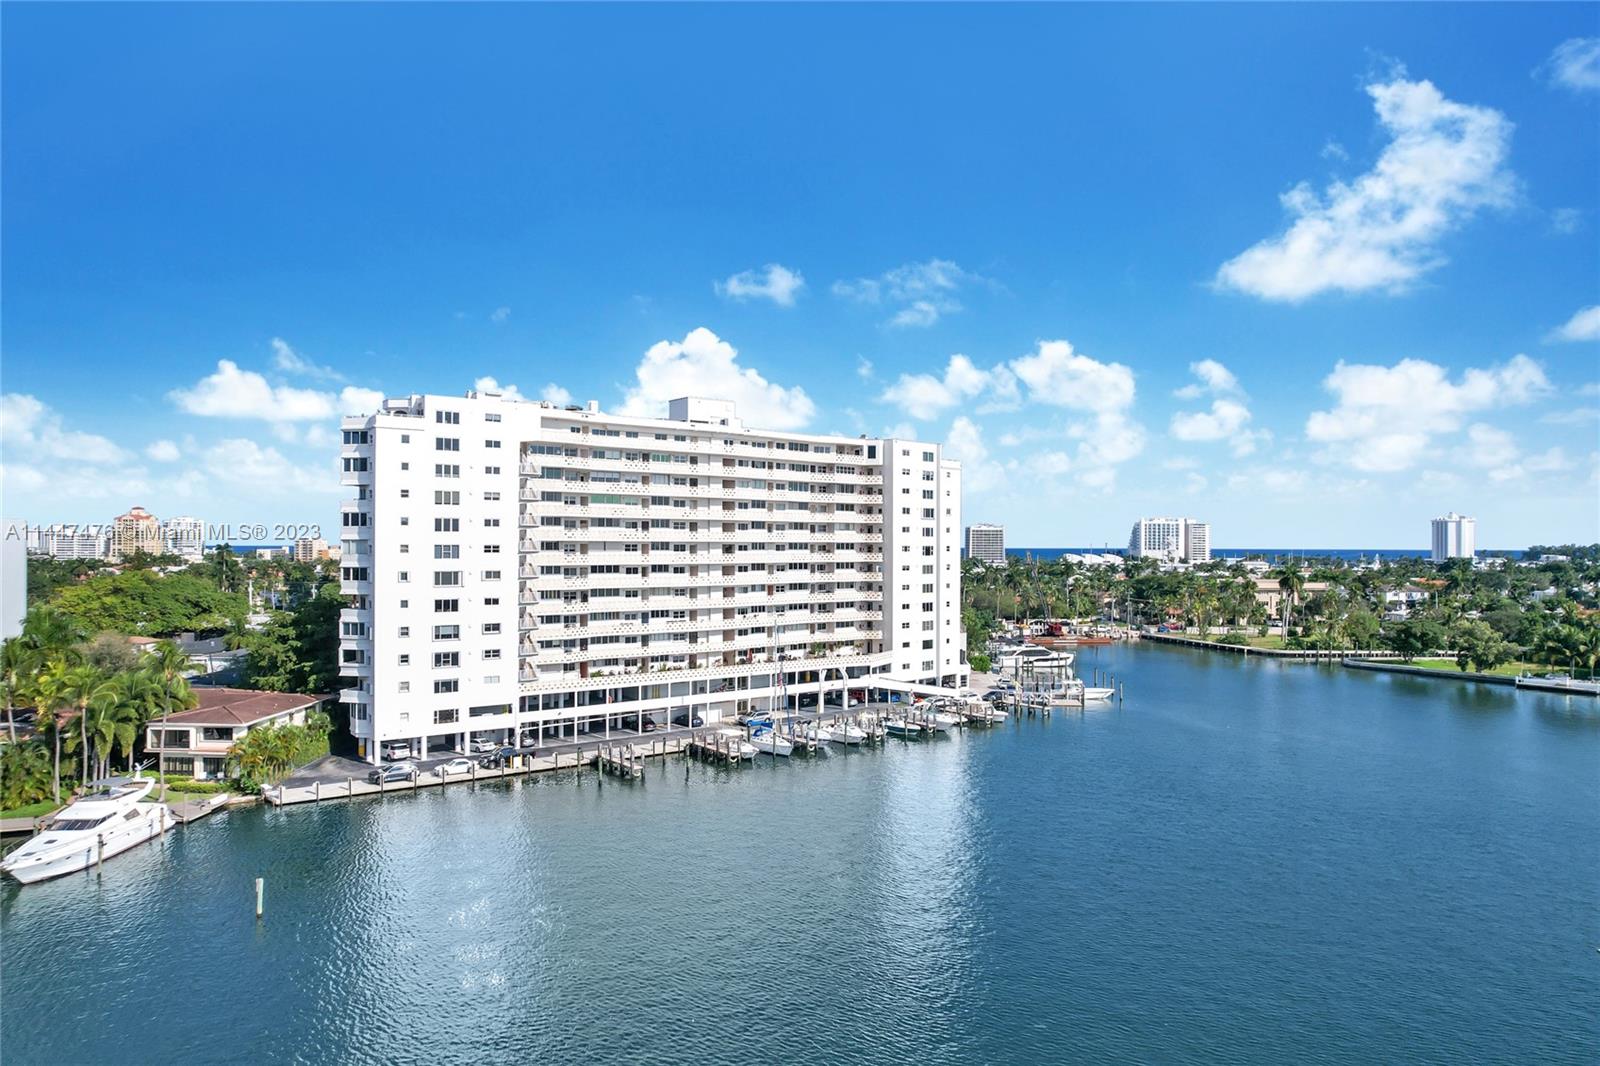 Highly desirable double unit at The Four Seasons, a boutique luxury residence located on Sunset Lake and less than one block to Las Olas and the Intracoastal. This elegant, 3 BR/3.5 BA plus den designer flow thru model was completely renovated with fine fixtures and finishes throughout, including Schonbek chandeliers and custom millwork. Features include impact windows and doors, 9’ ceilings, split bedrooms with en-suite baths, multiple walk-in closets, oversized terrace, marble/wood flooring, gourmet kitchen, wet bar, separate laundry room, 2 parking spaces and much more. Enjoy spectacular views from all rooms. Dockage available for up to a 40+' boat with no fixed bridges and easy ocean access.  Large dogs allowed and unit can be rented immediately for annual lease. Furniture negotiable.